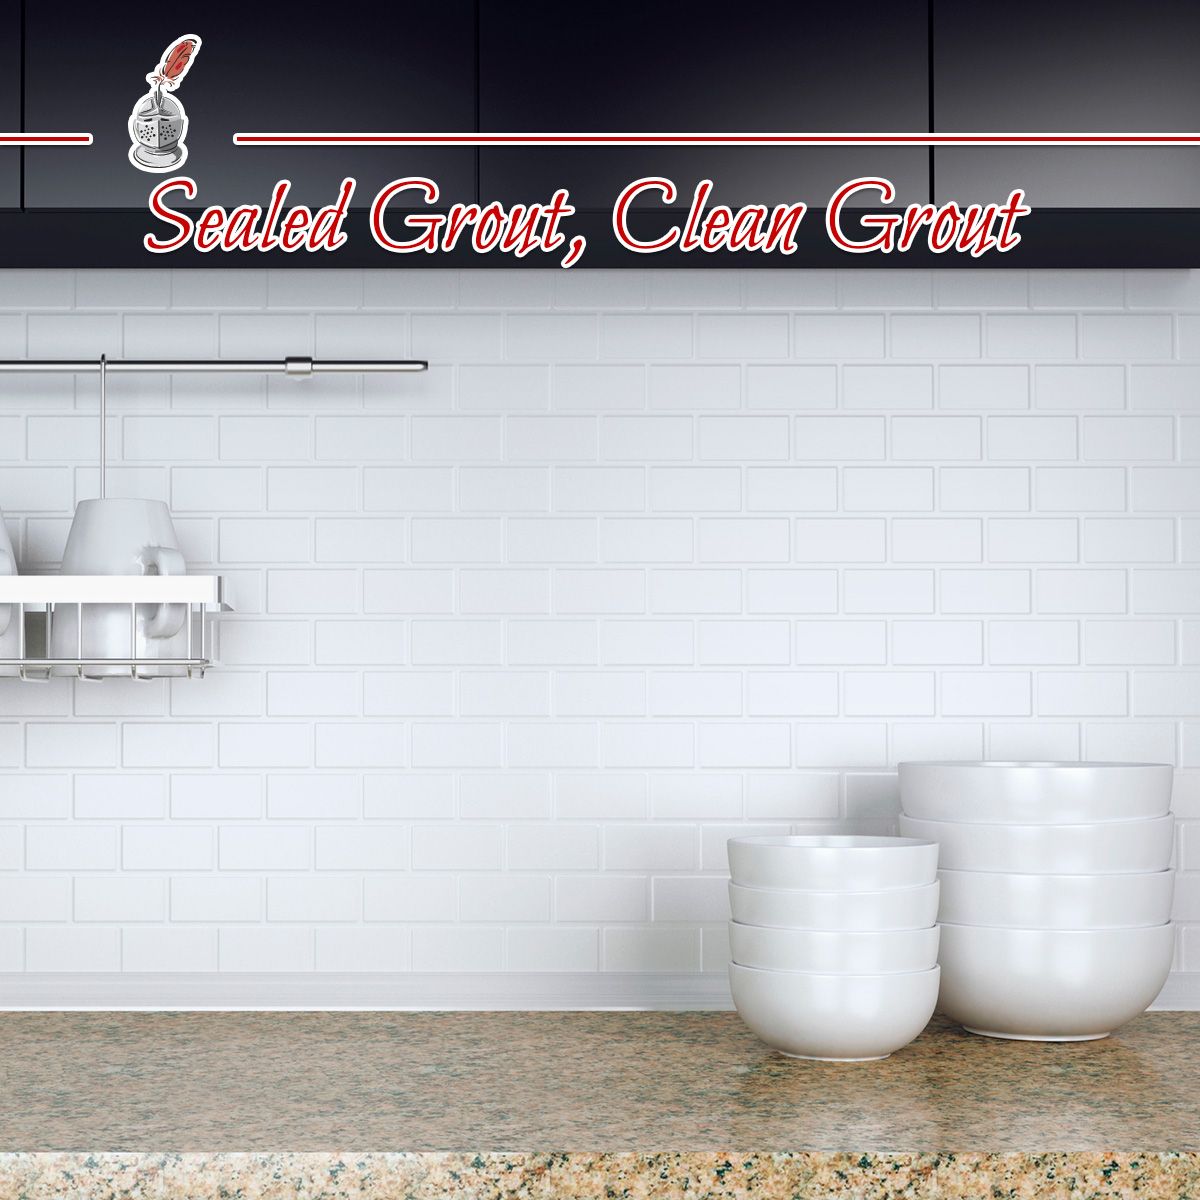 Sealed Grout, Clean Grout